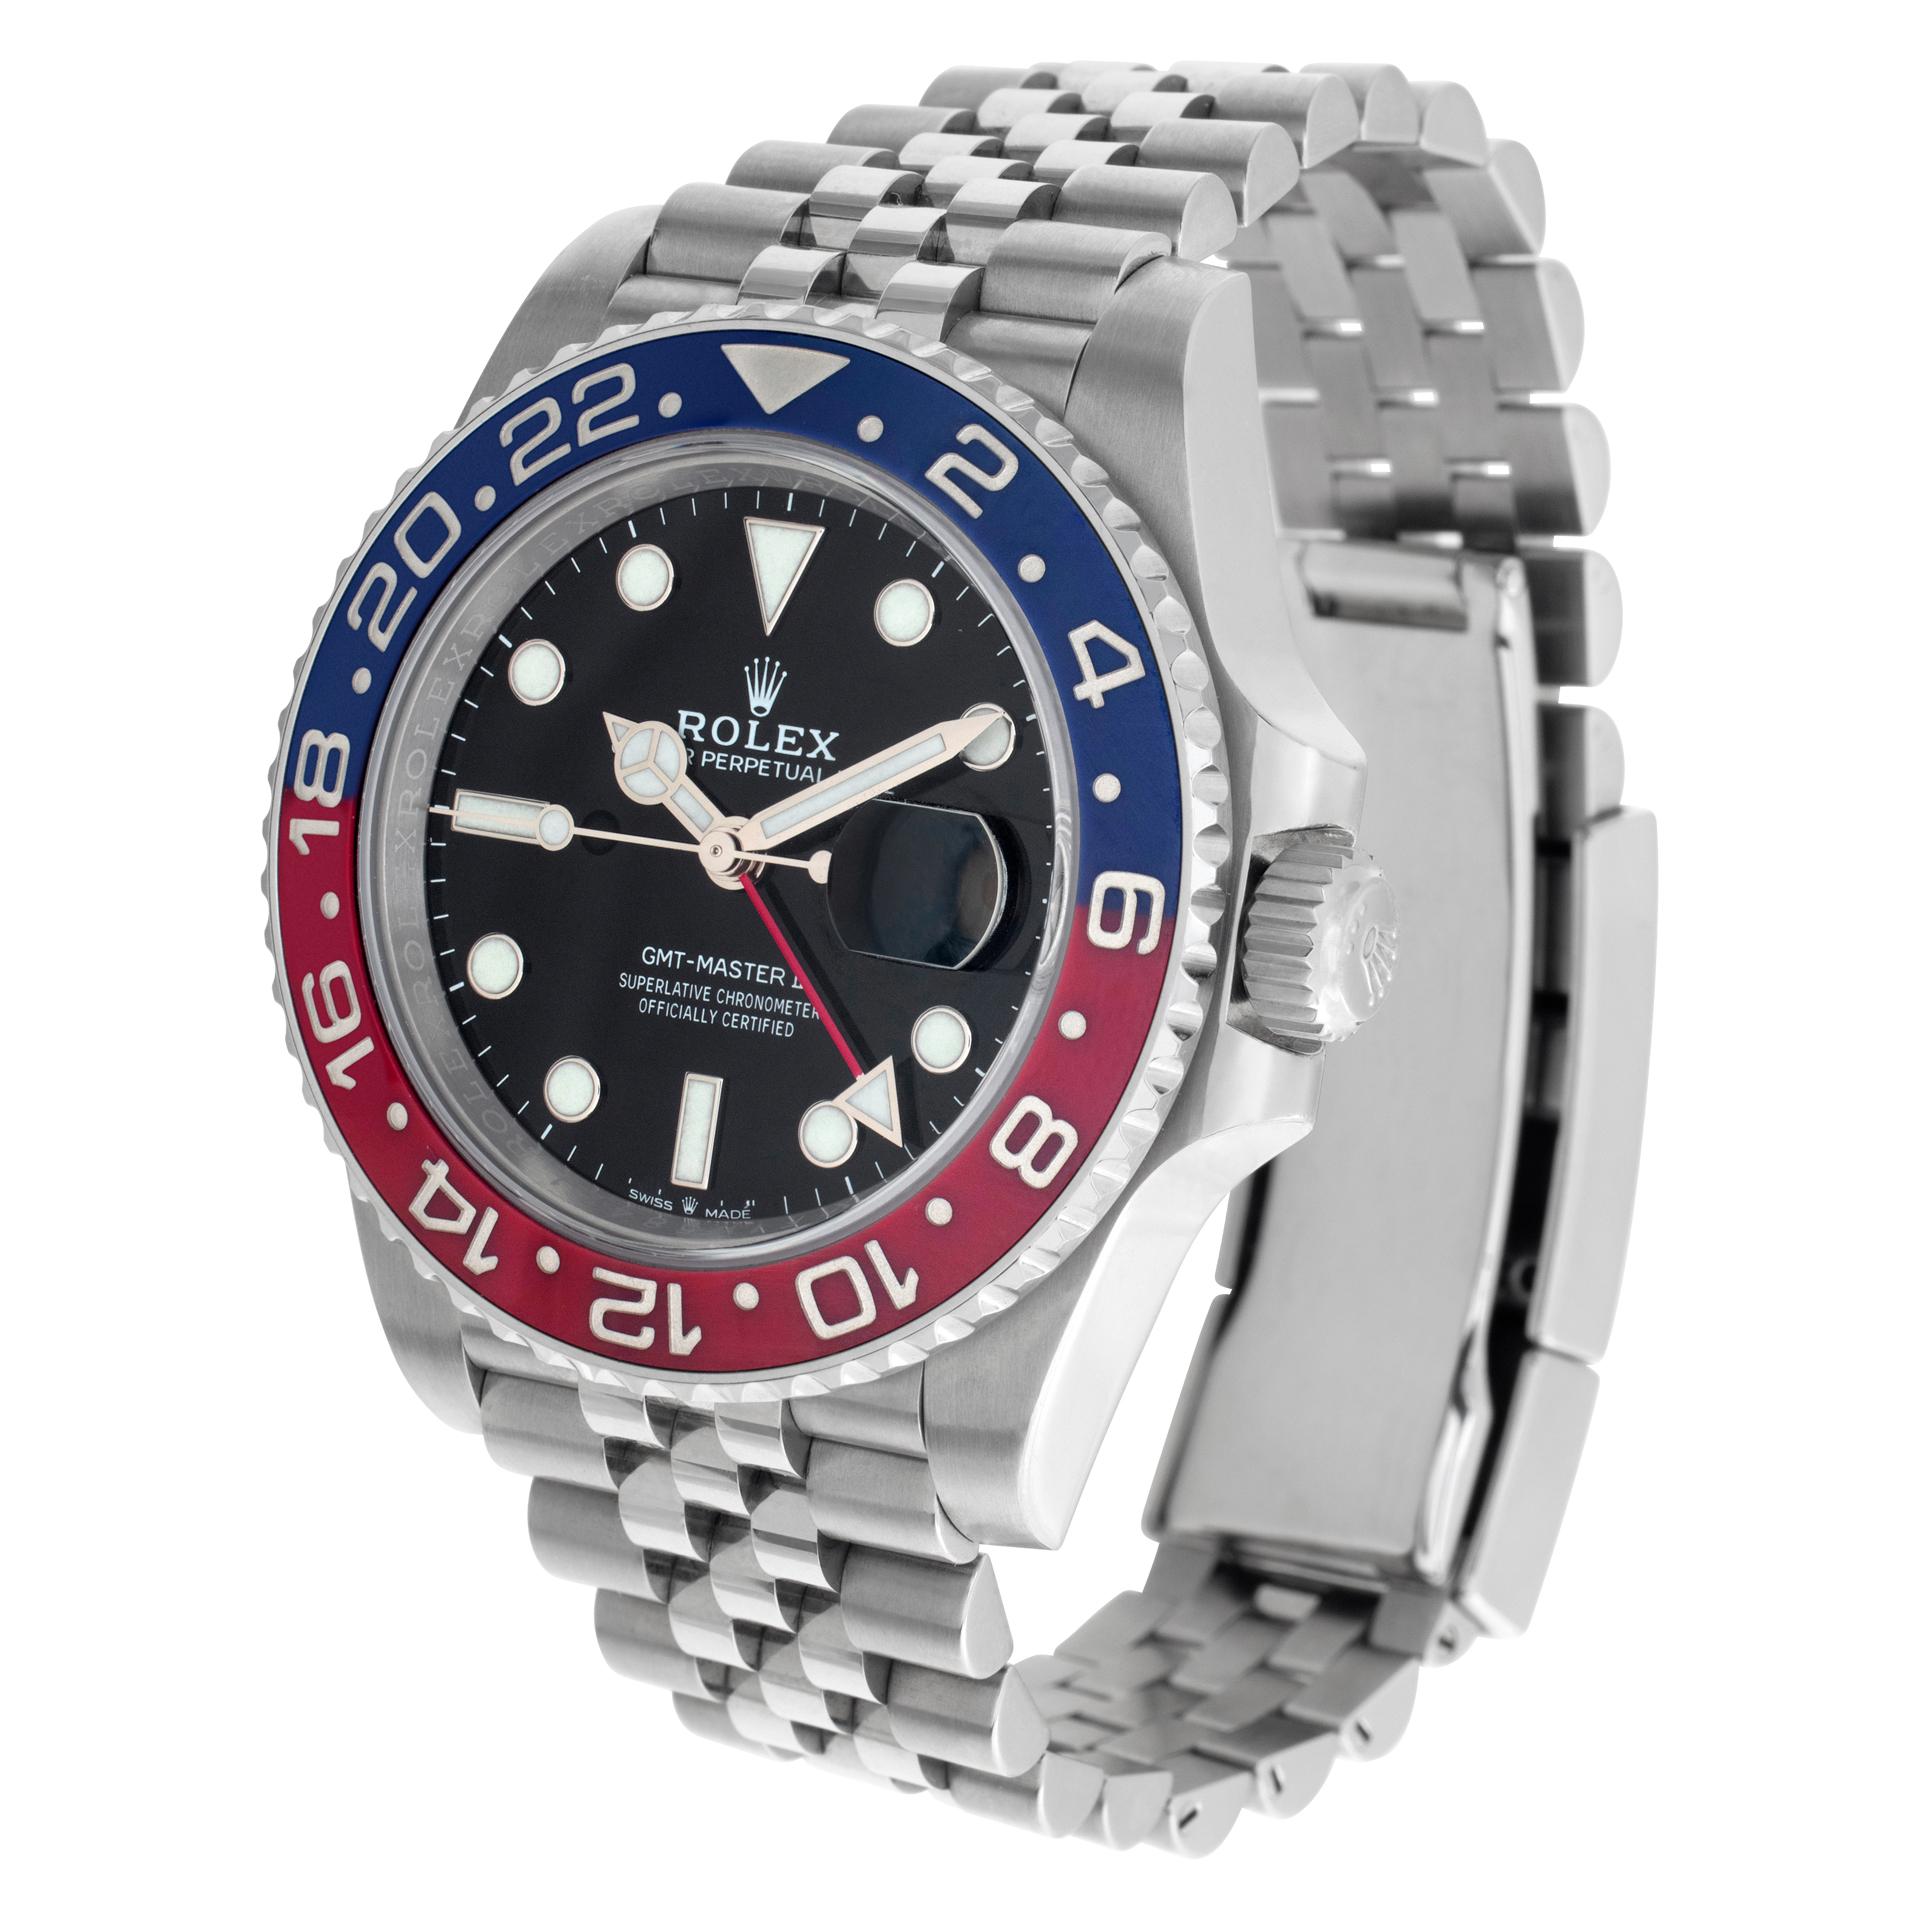 Rolex GMT Master II Pepsi in stainless steel. Auto w/ sweep seconds and dual time. 40 mm case size. Box, booklets and service warranty card dated 2019. **Bank wire only at this price** Ref 126710. Fine Pre-owned Rolex Watch. Certified preowned Sport